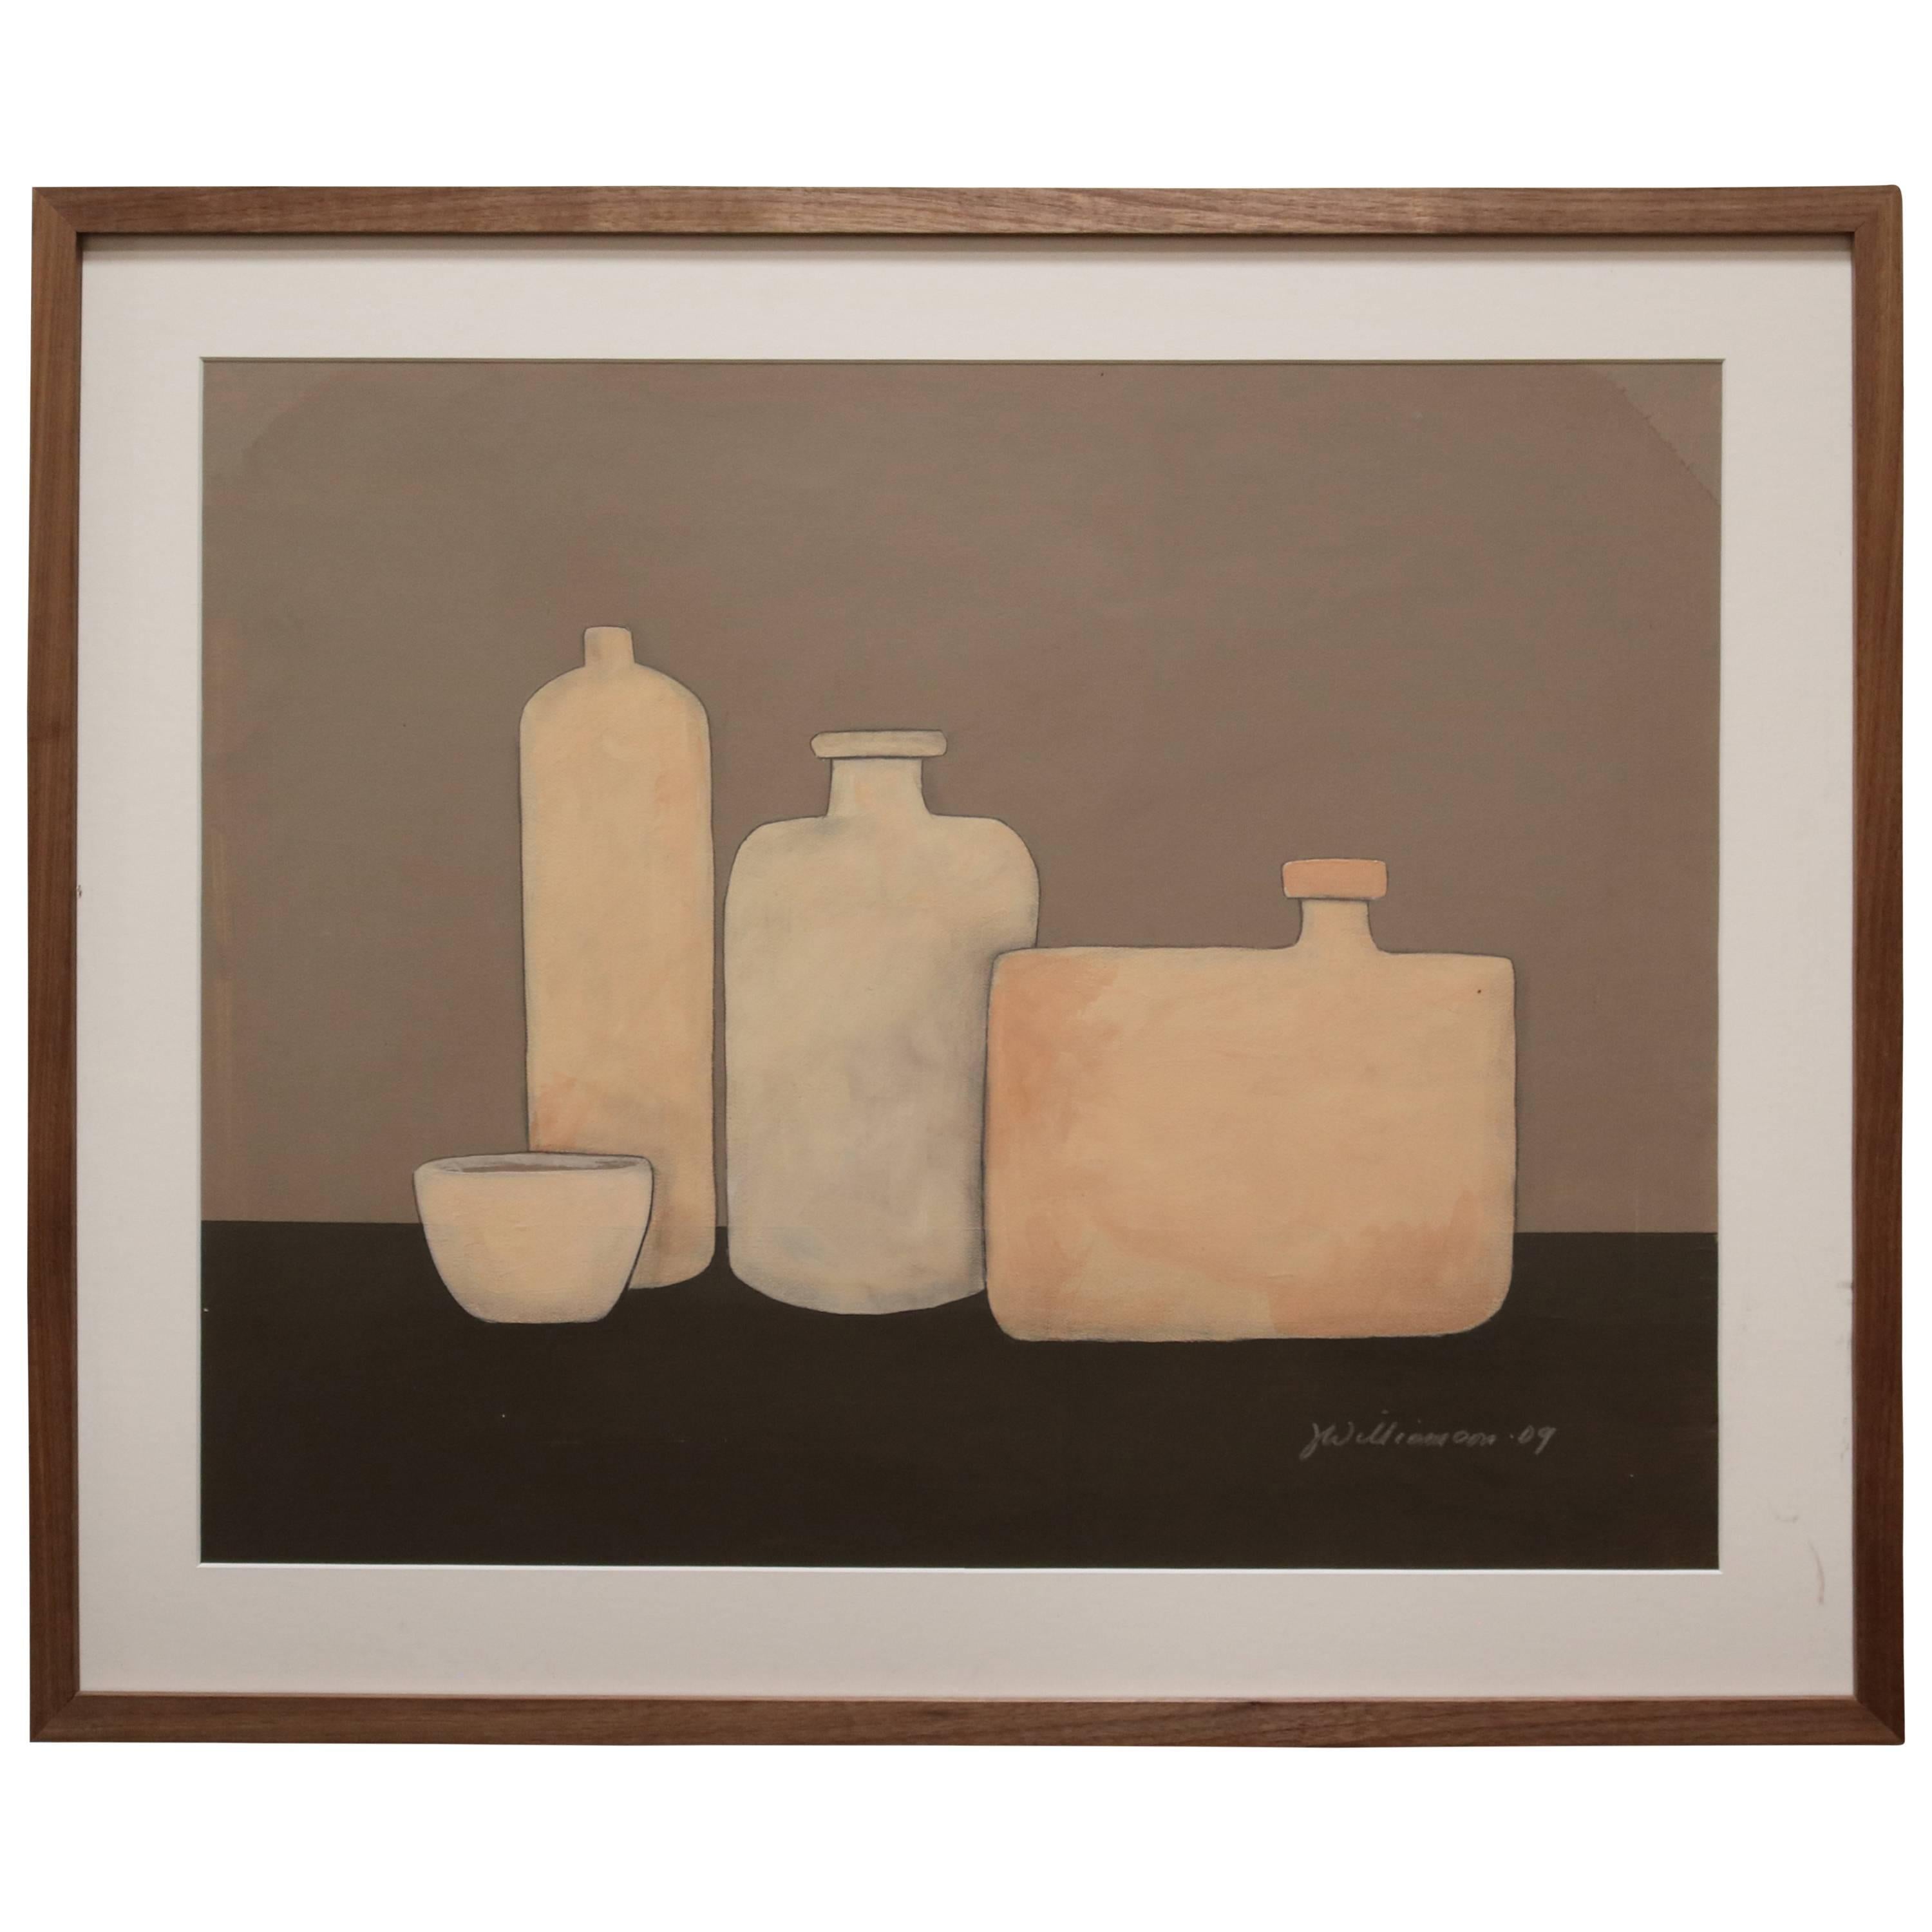 Painting of Three Vases and Bowl by Jerry Williamson